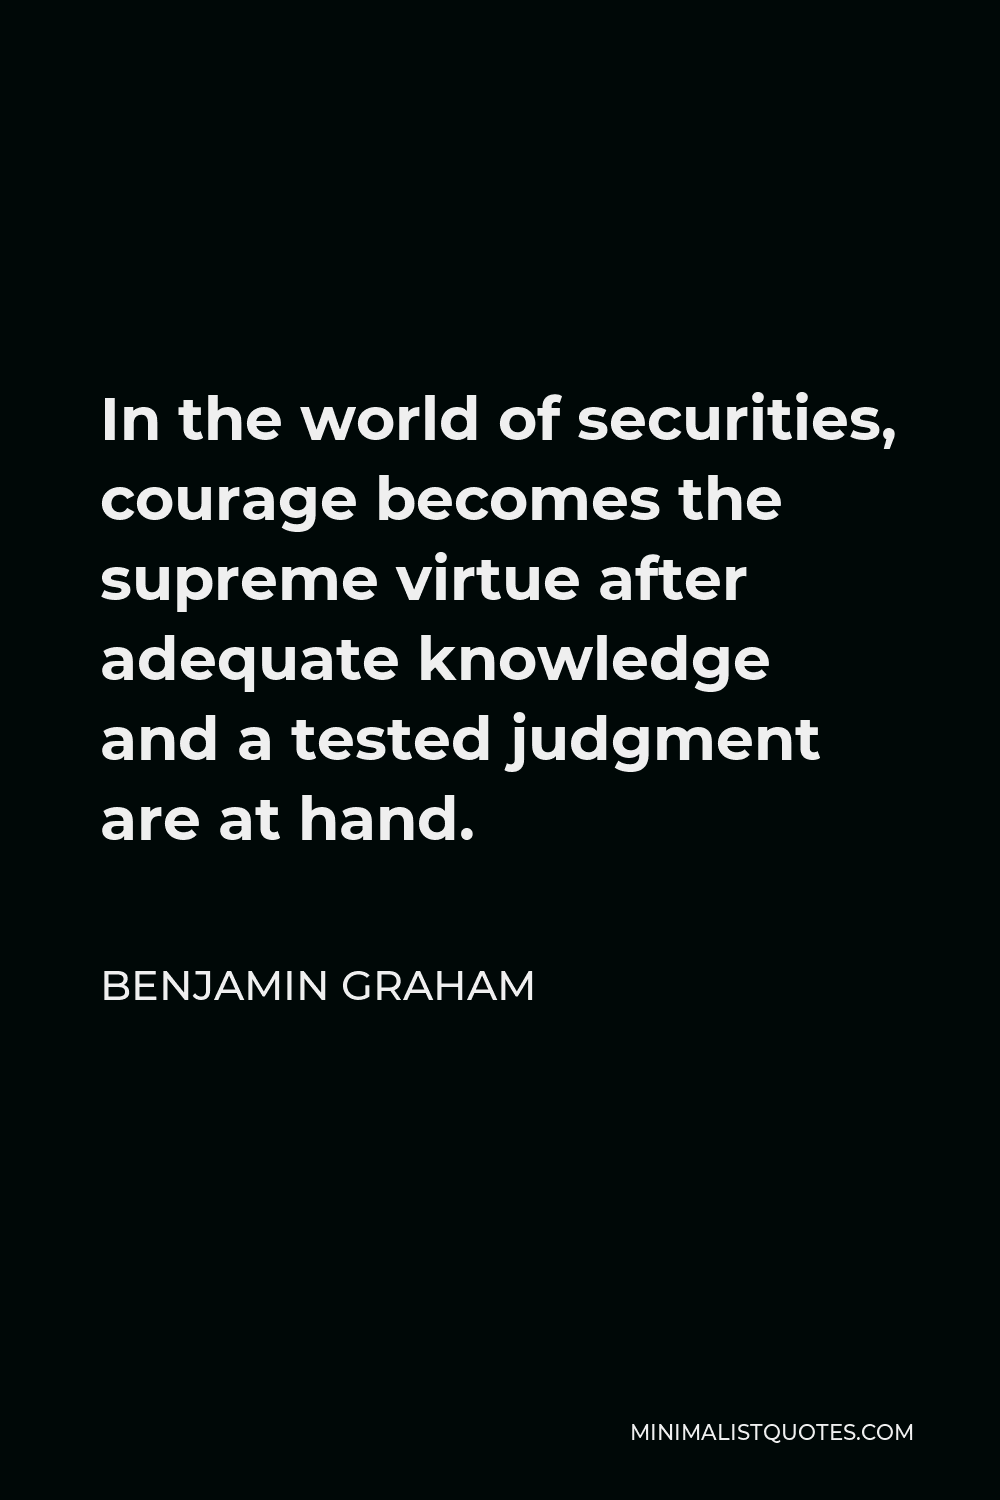 Benjamin Graham Quote - In the world of securities, courage becomes the supreme virtue after adequate knowledge and a tested judgment are at hand.